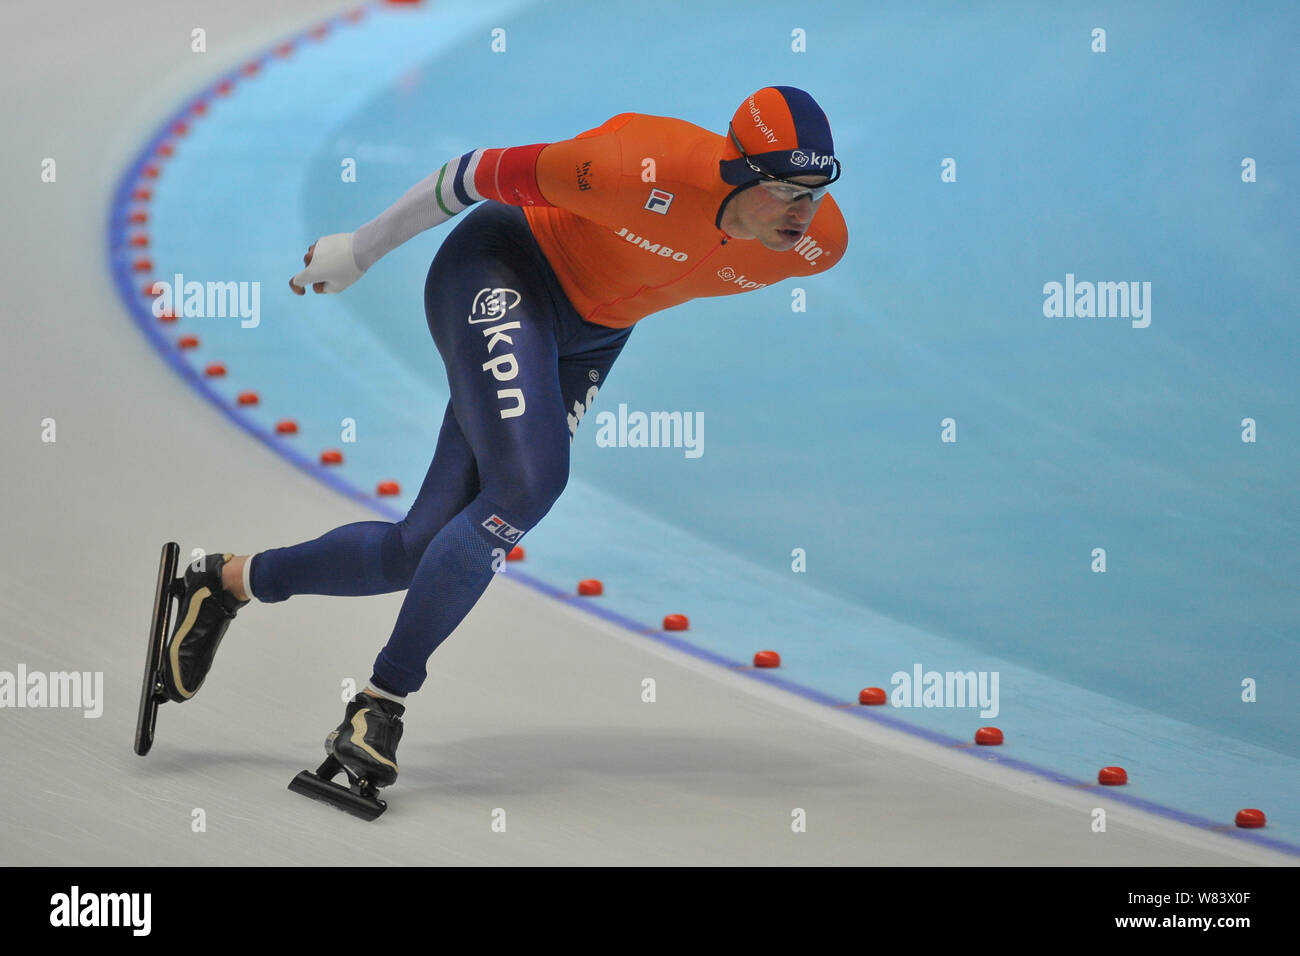 Dutch skater Sven Kramer competes during the men's 5000-meter Division A match of the ISU World Cup Speed Skating competition in Harbin city, northeas Stock Photo